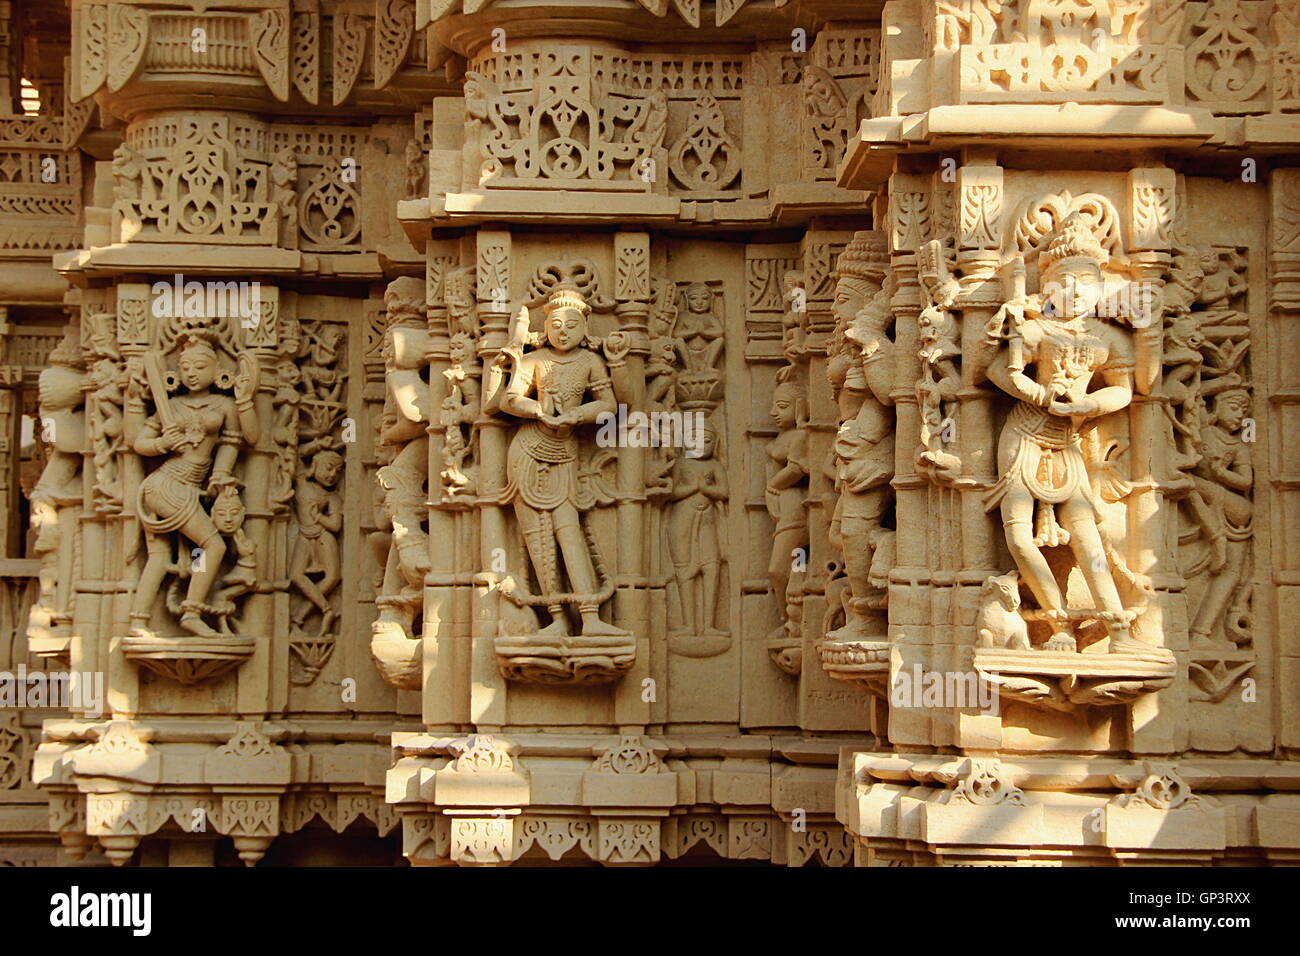 Fabulous marble stone carvings on the wall of a Jain Temple at Jaisalmer Fort in Jaisalmer, Rajasthan, India, Asia Stock Photo